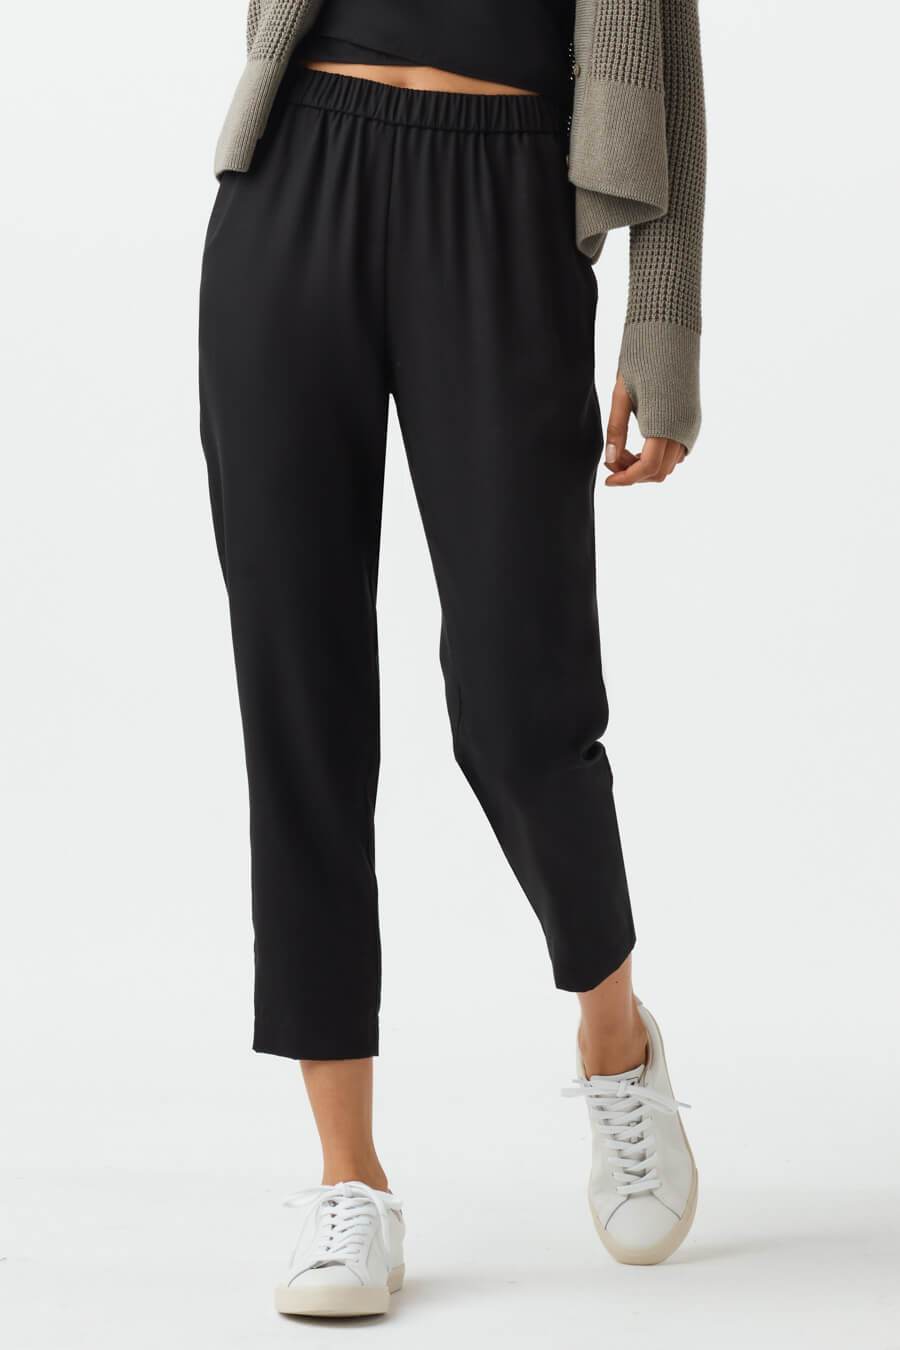 Reiss Erin Cotton Tapered Slim Trousers | REISS USA